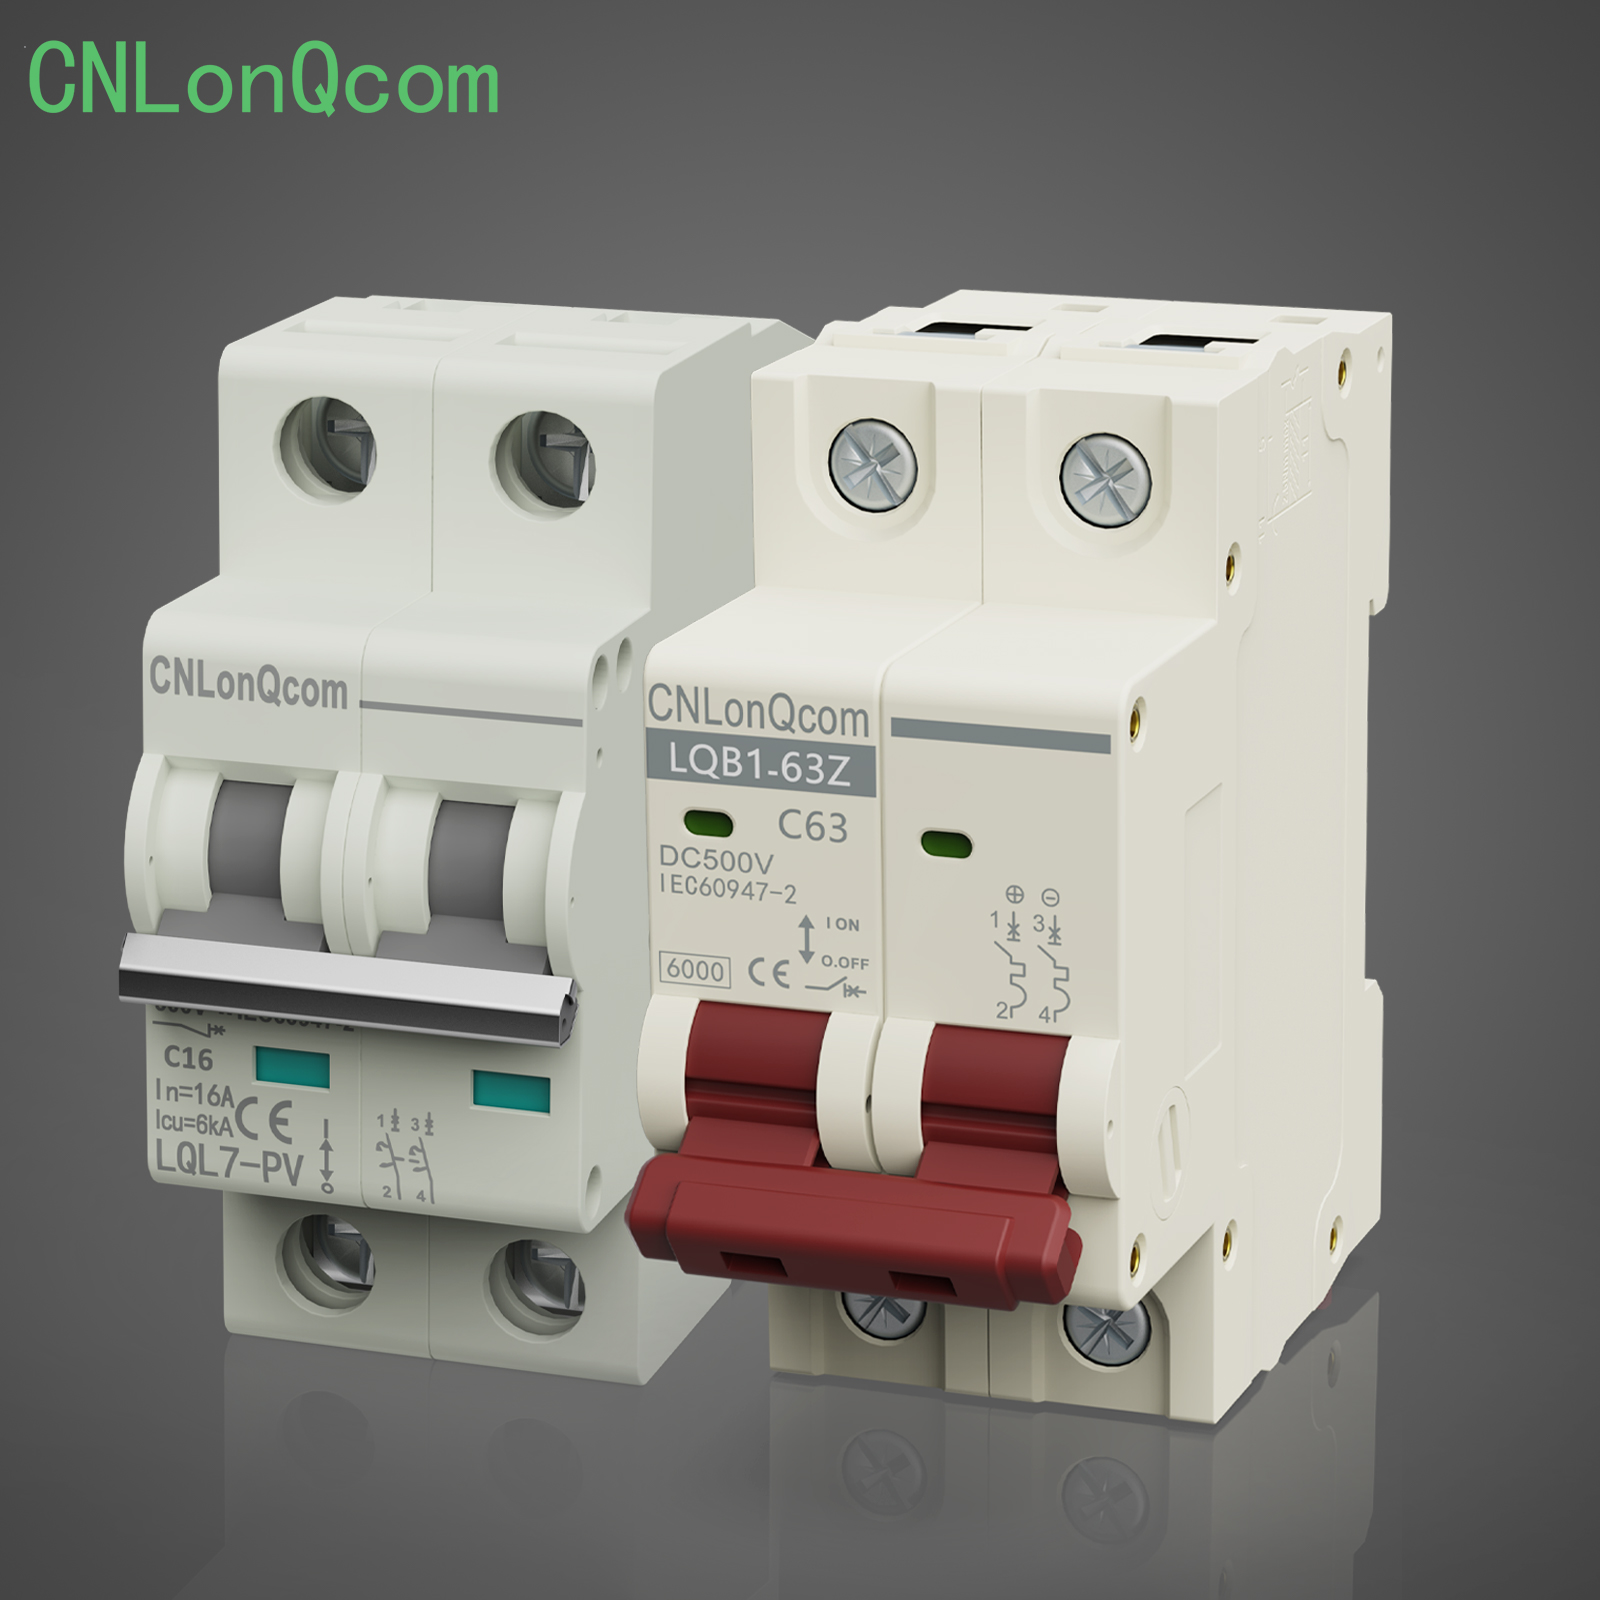 CNLonQcom Introduces High-Quality Miniature Circuit Breakers with CE Certification